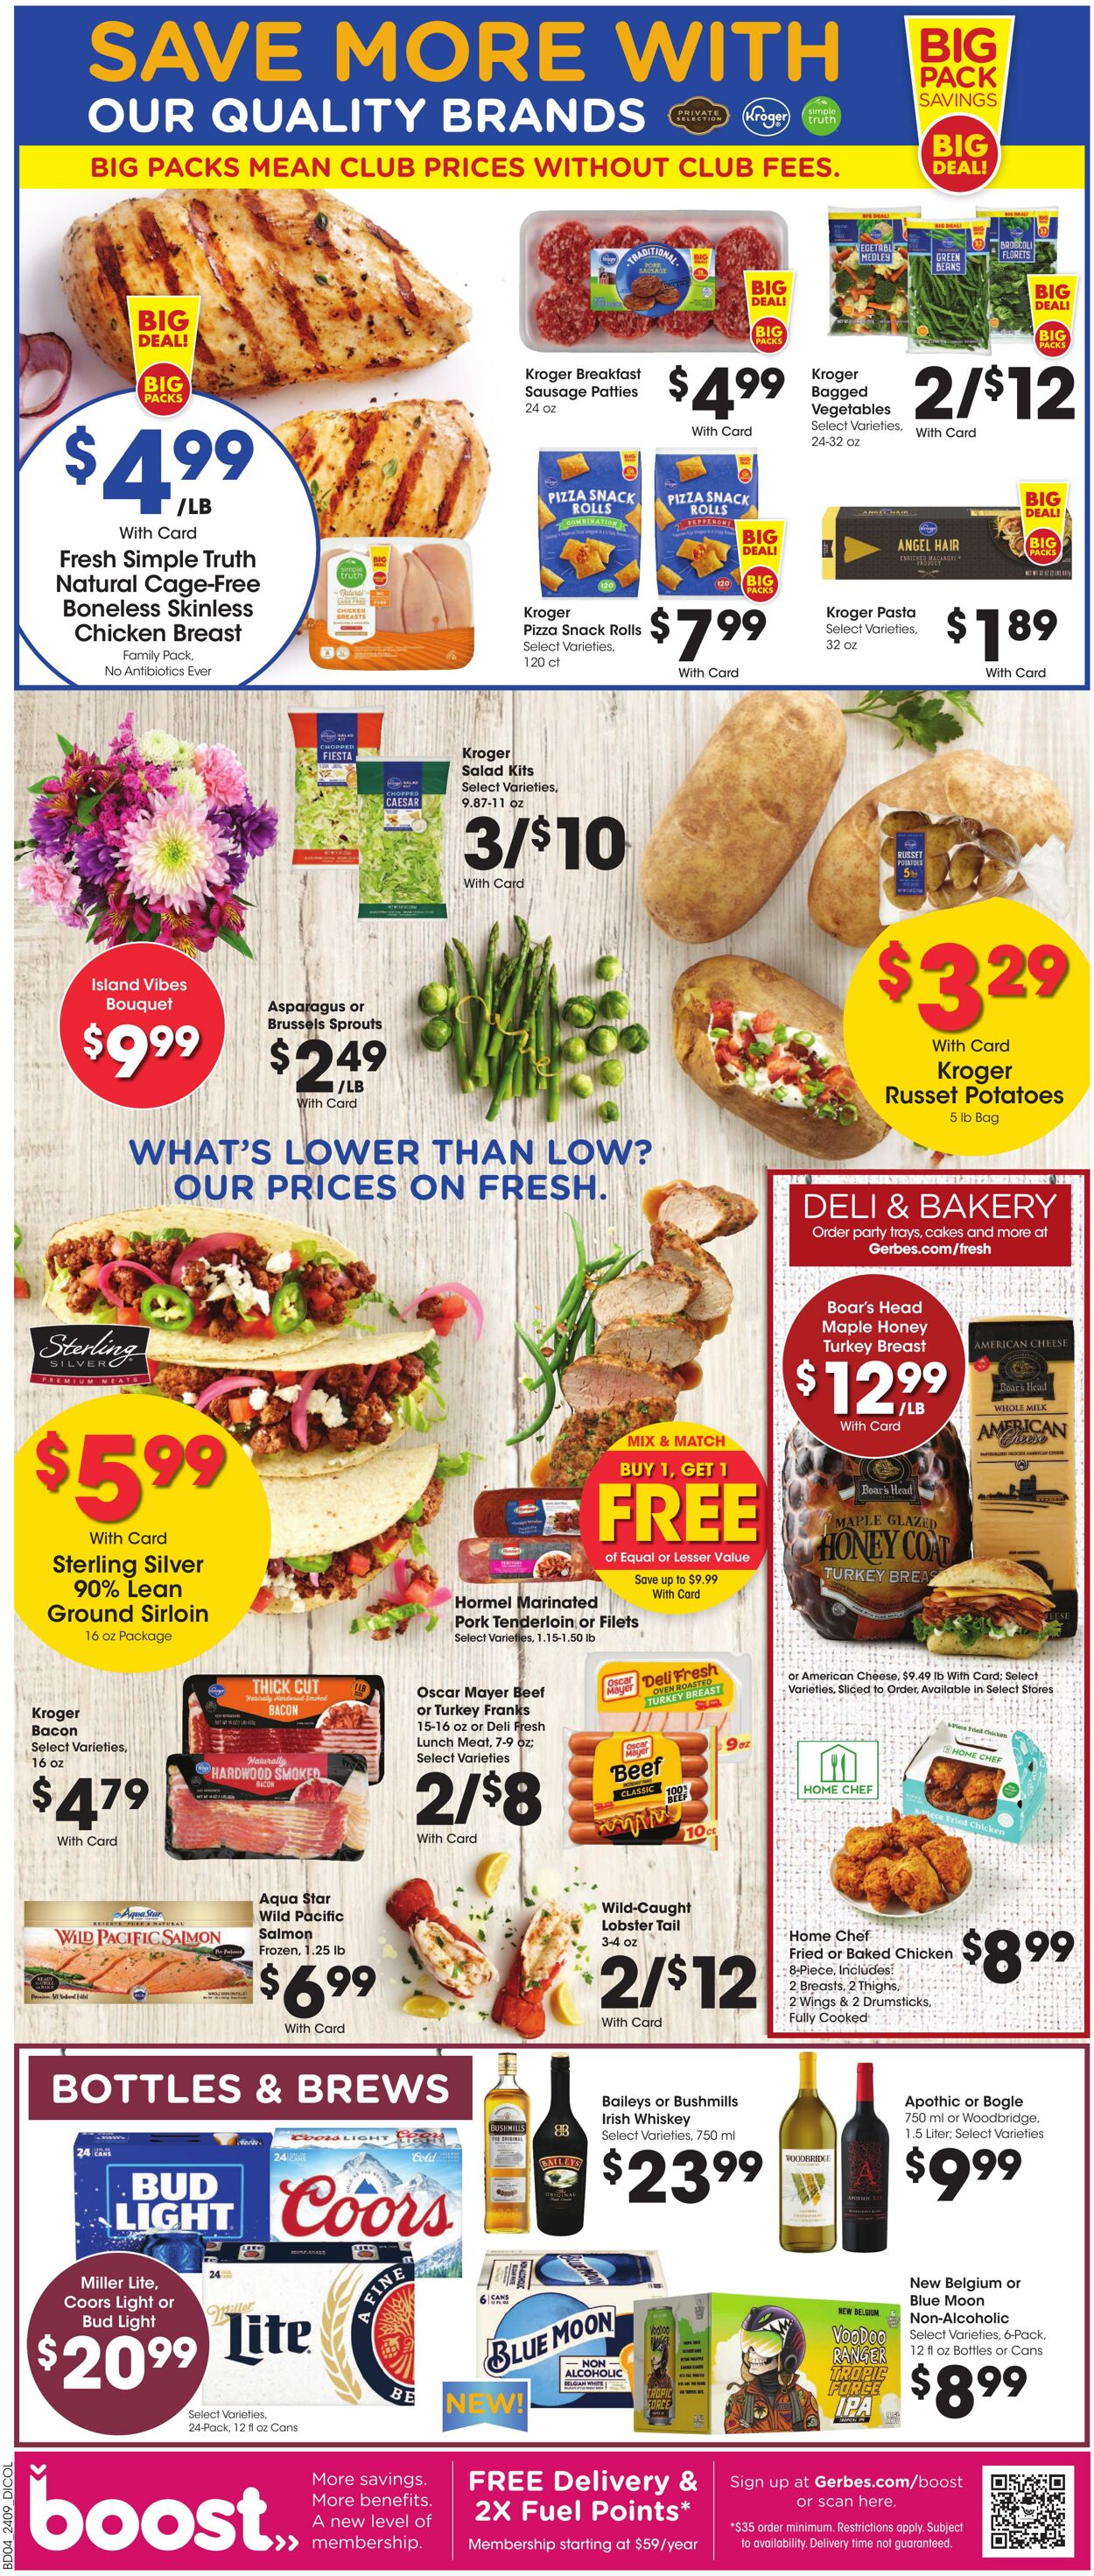 Weekly ad Gerbes Supermarkets 04/03/2024 - 04/09/2024